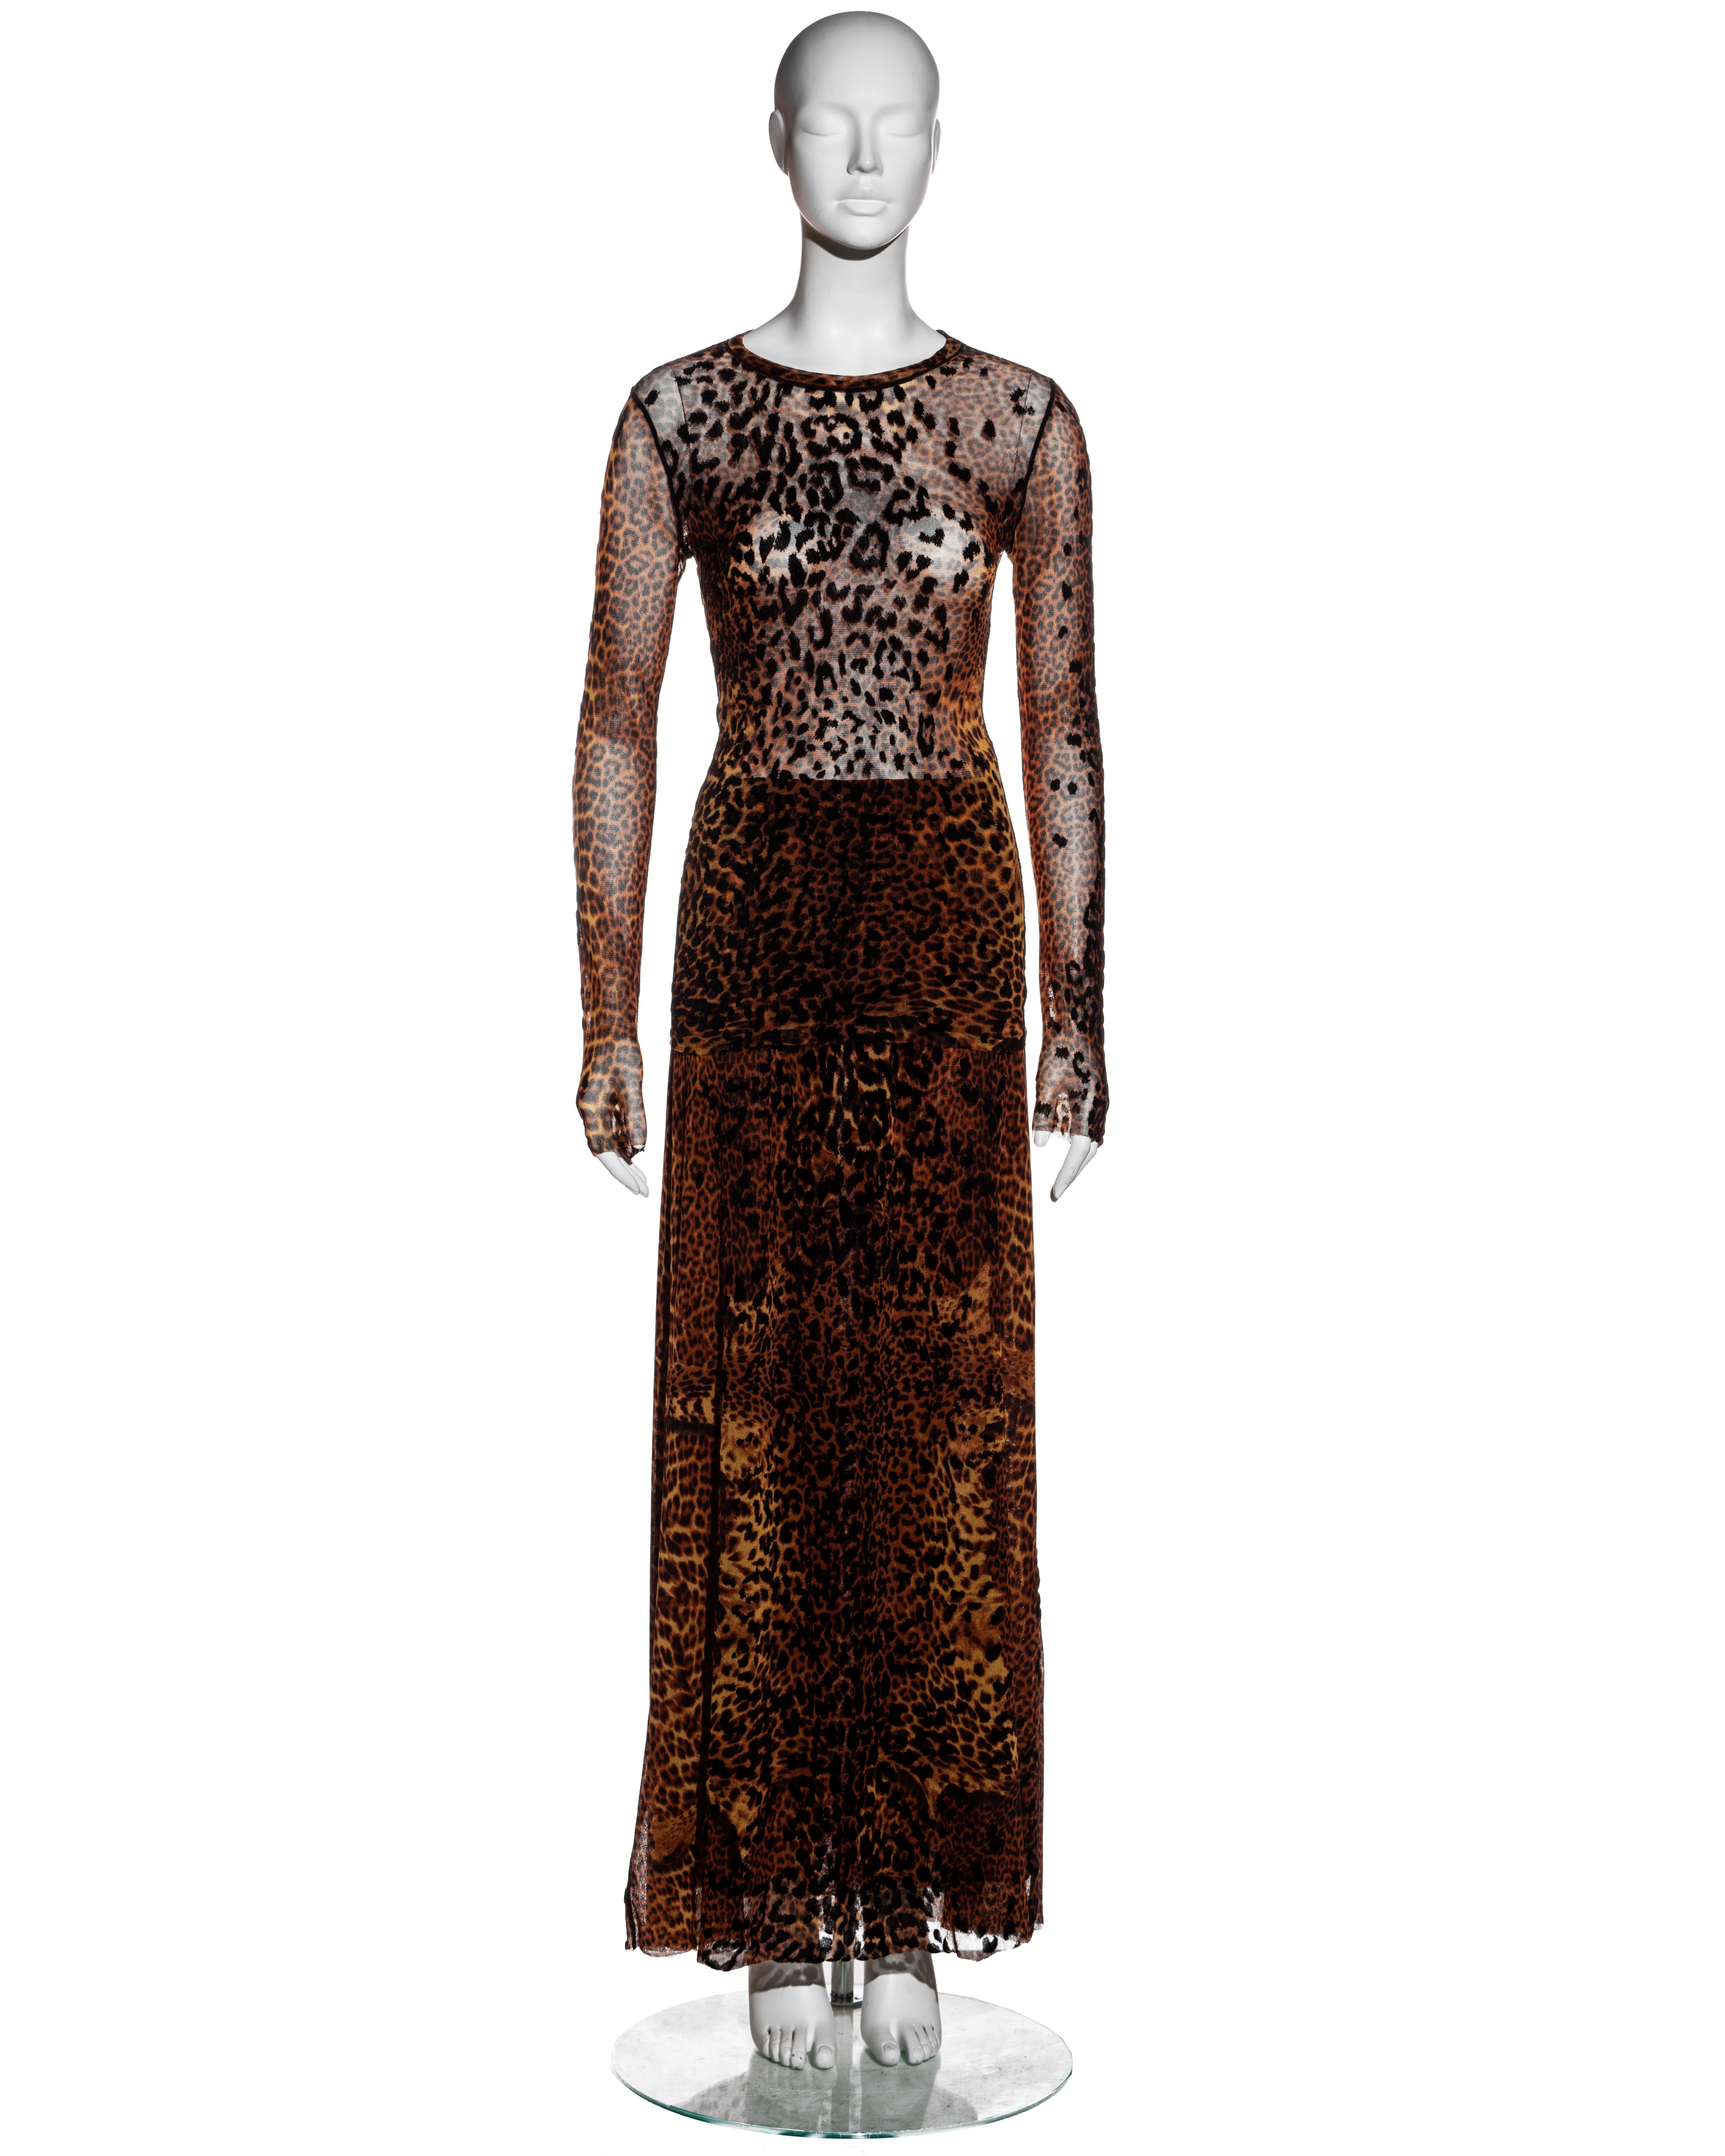 ▪ Jean Paul Gaultier leopard print mesh 3-piece set 
▪ Nylon mesh 
▪ Black velvet detail throughout in matching print 
▪ Long sleeve fitted top
▪ Vest with high turtle neck 
▪ Maxi skirt with lining 
▪ Size Large (sizing flexible) 
▪ Fall-Winter 2004